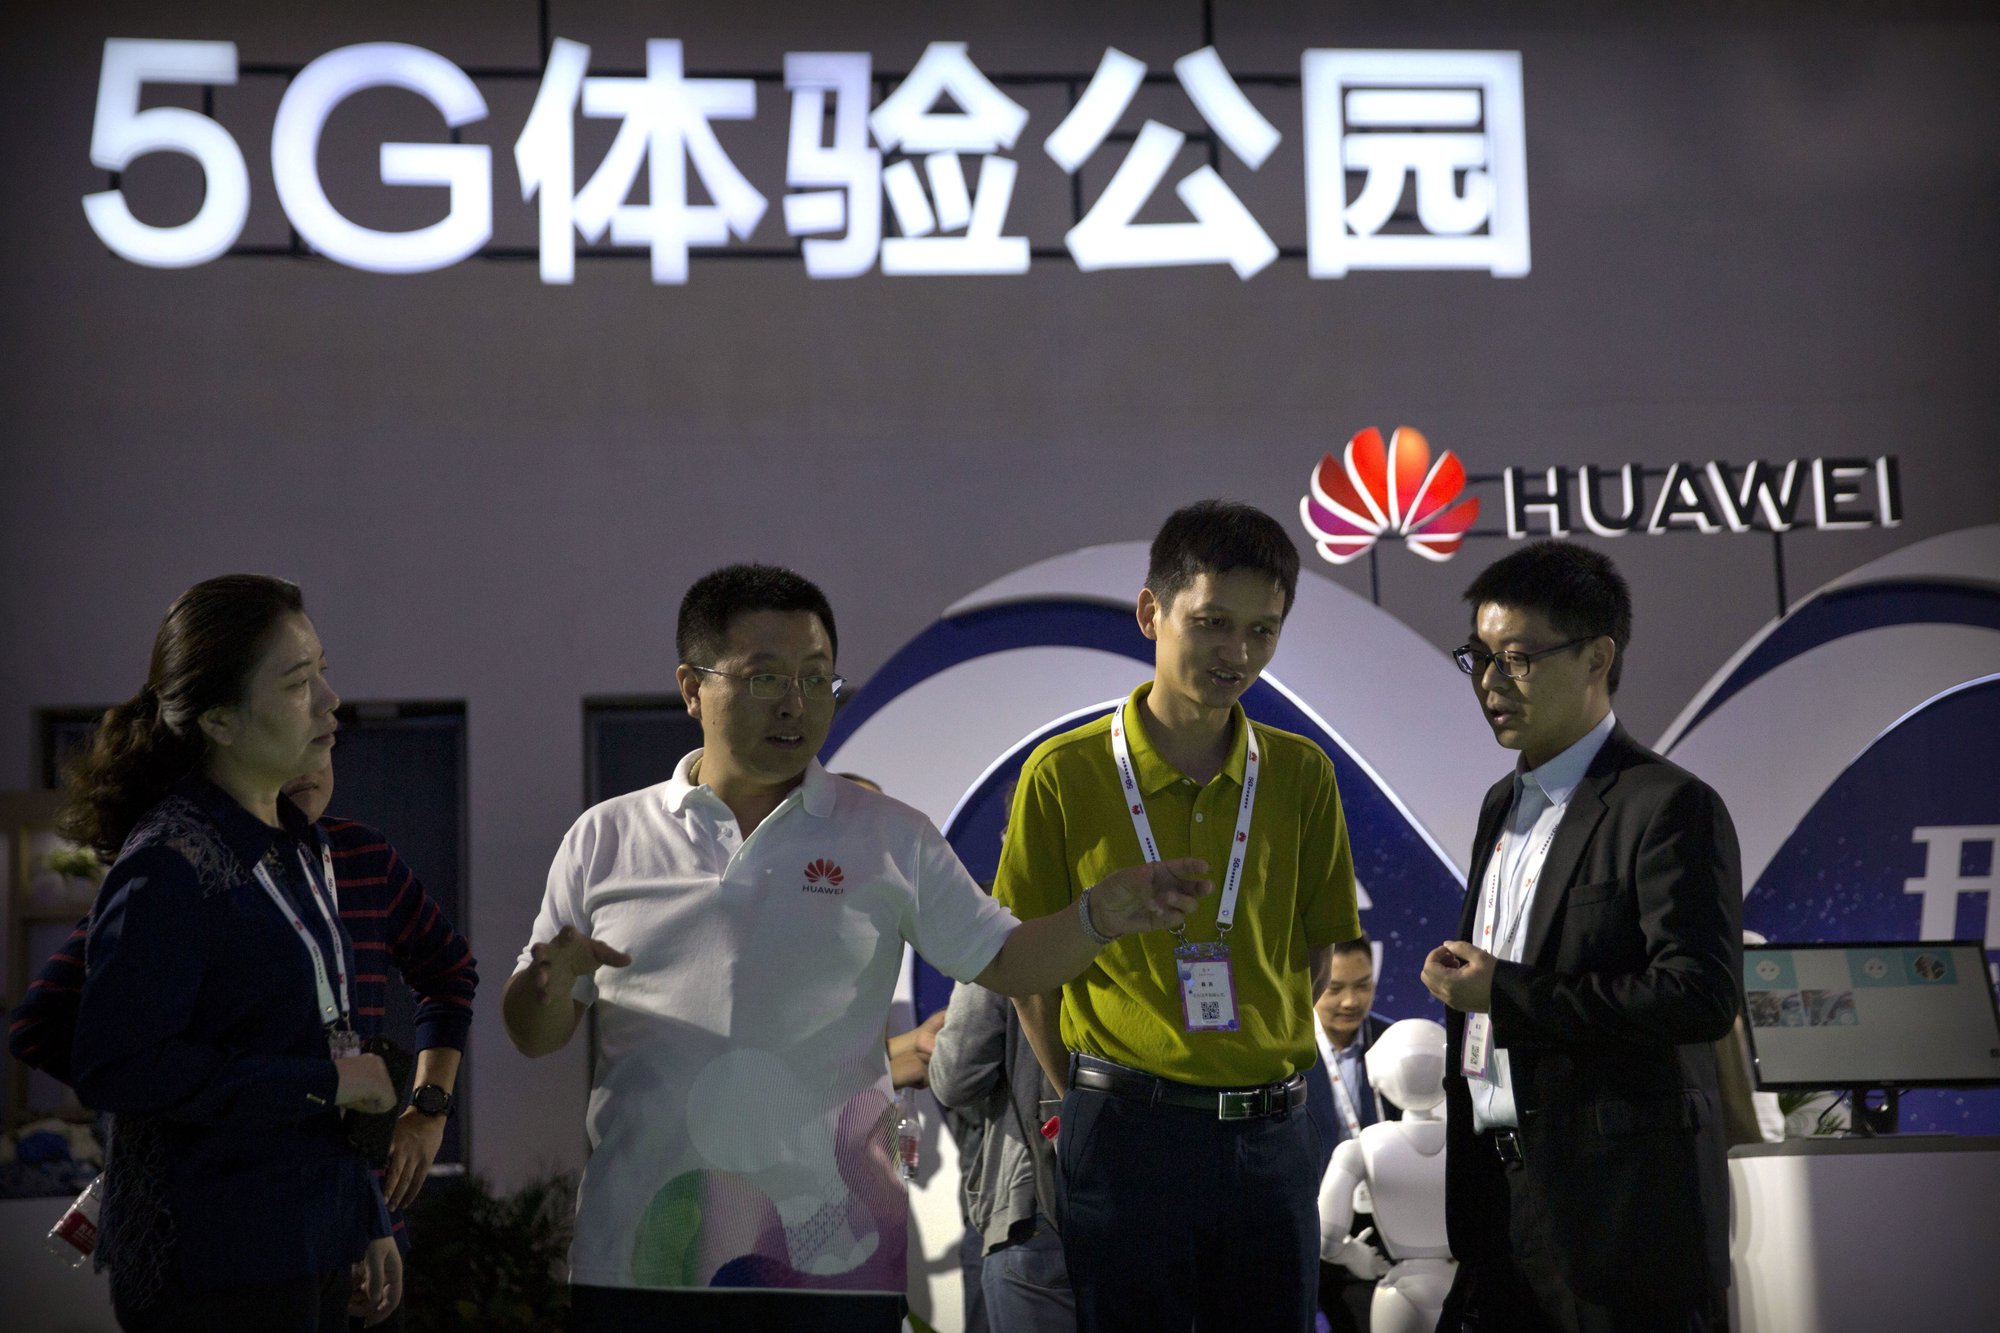 FILE - In this Sept. 26, 2018, file photo, visitors look at a display for 5G wireless technology from Chinese technology firm Huawei at the PT Expo in Beijing. Photo: AP